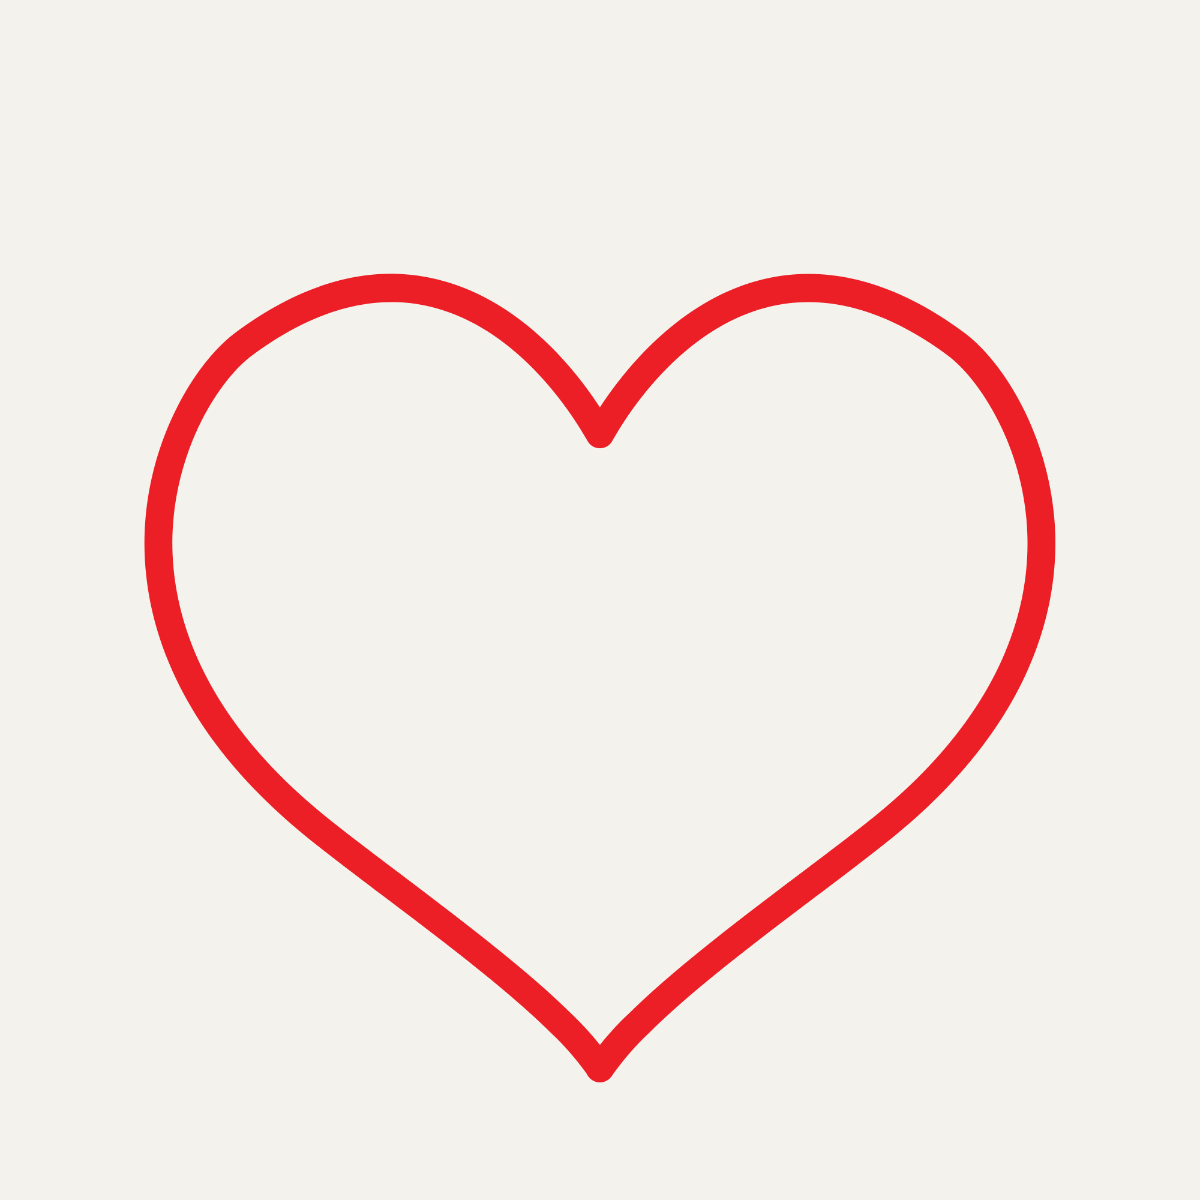 Red Heart Outline Vector Template